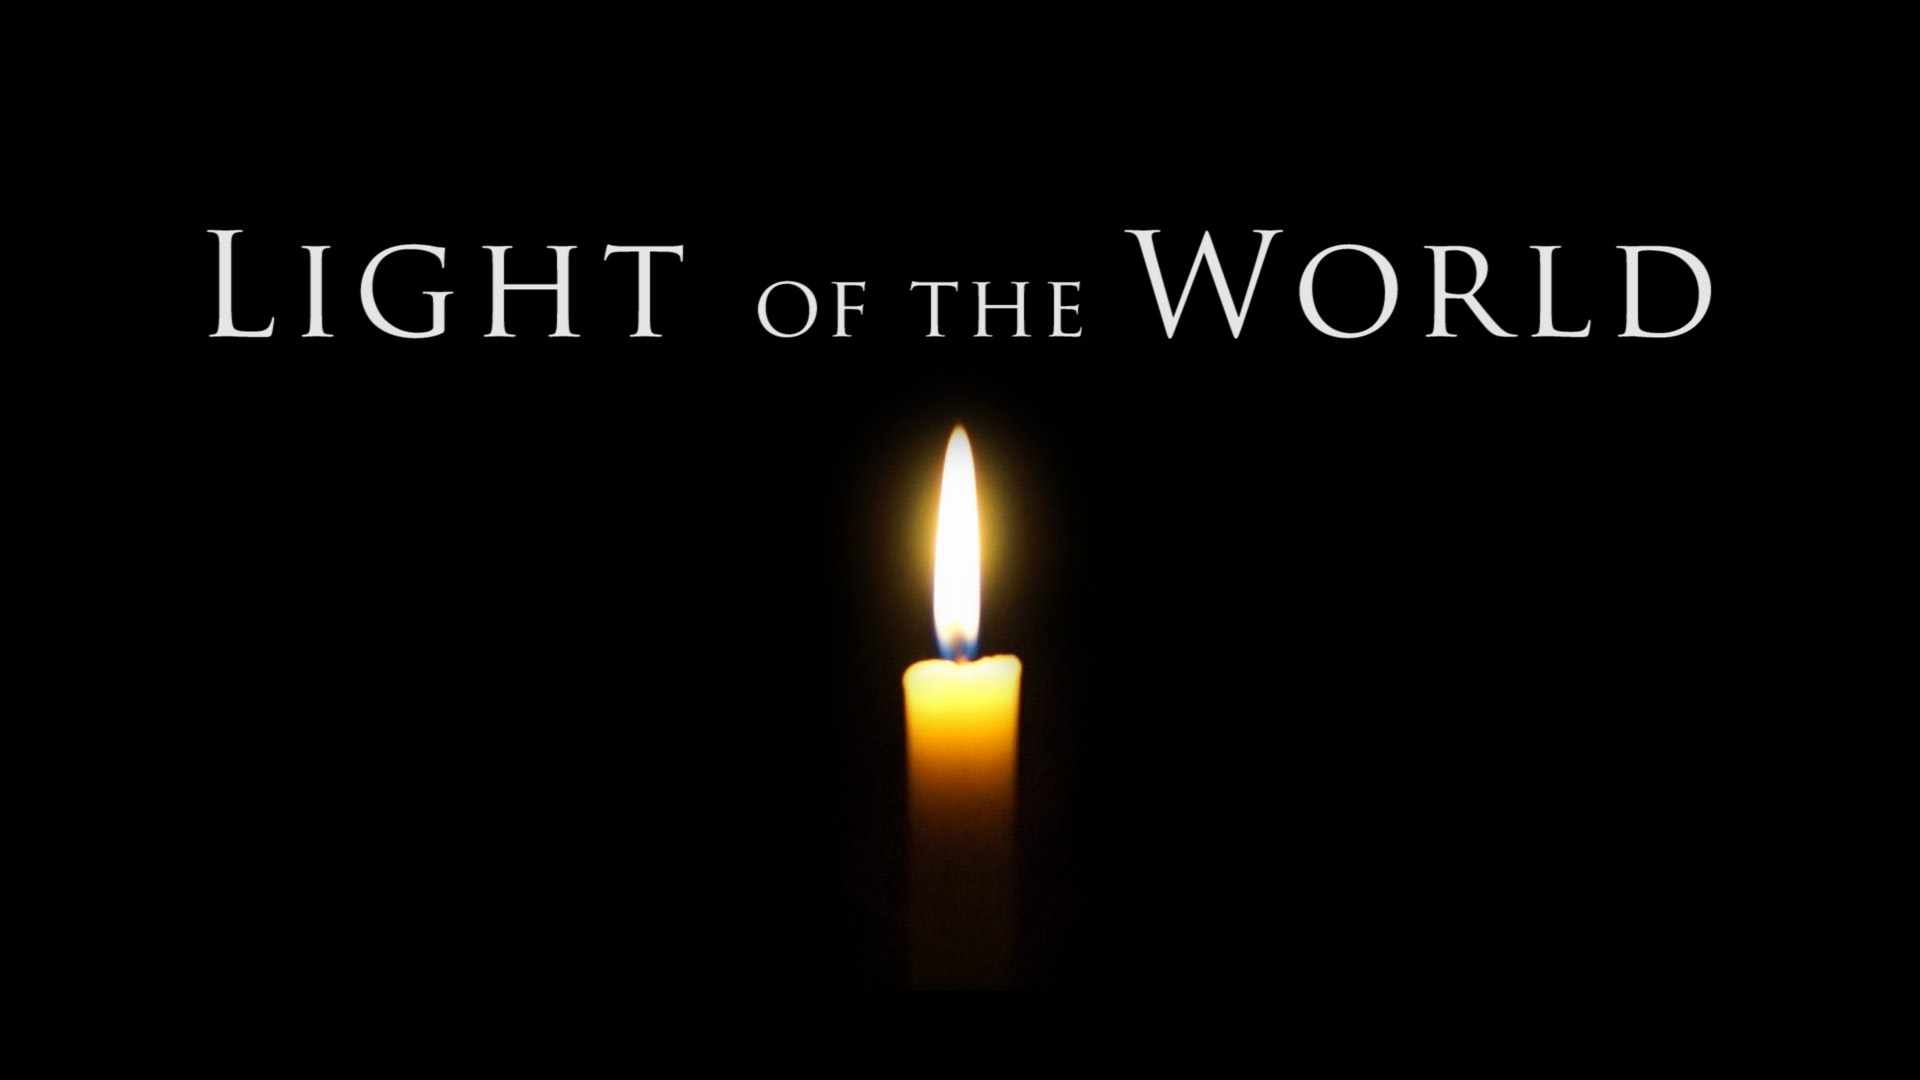 #MotivationalMonday with Pastor Gordon "Ep. 3 The Light Of The World Part 3"